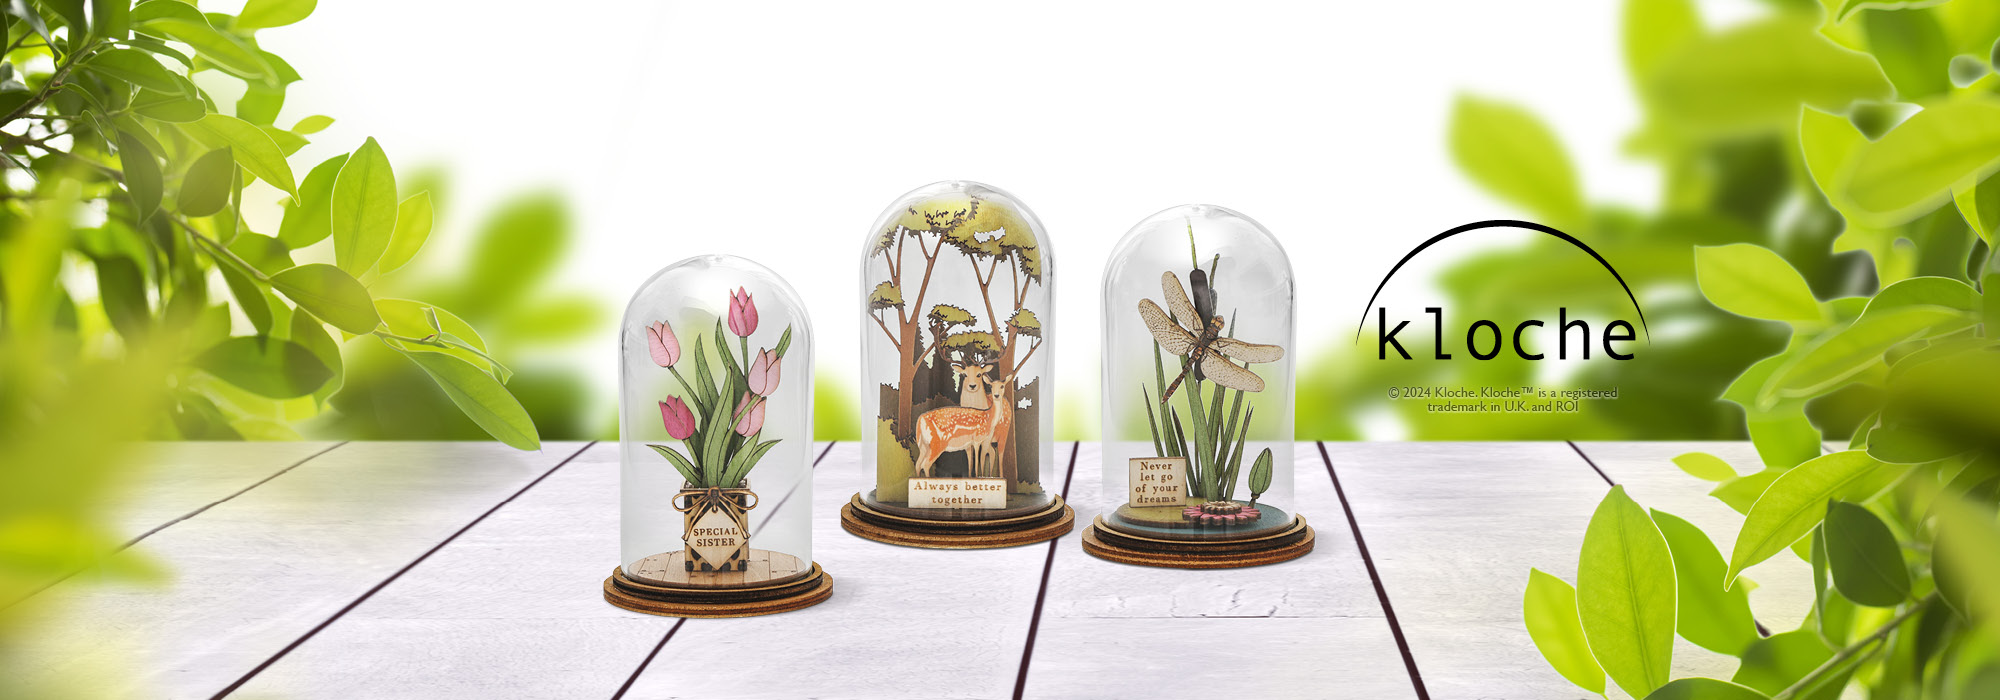 KLOCHE miniature decorative figurines for your home, made from sustainable materials